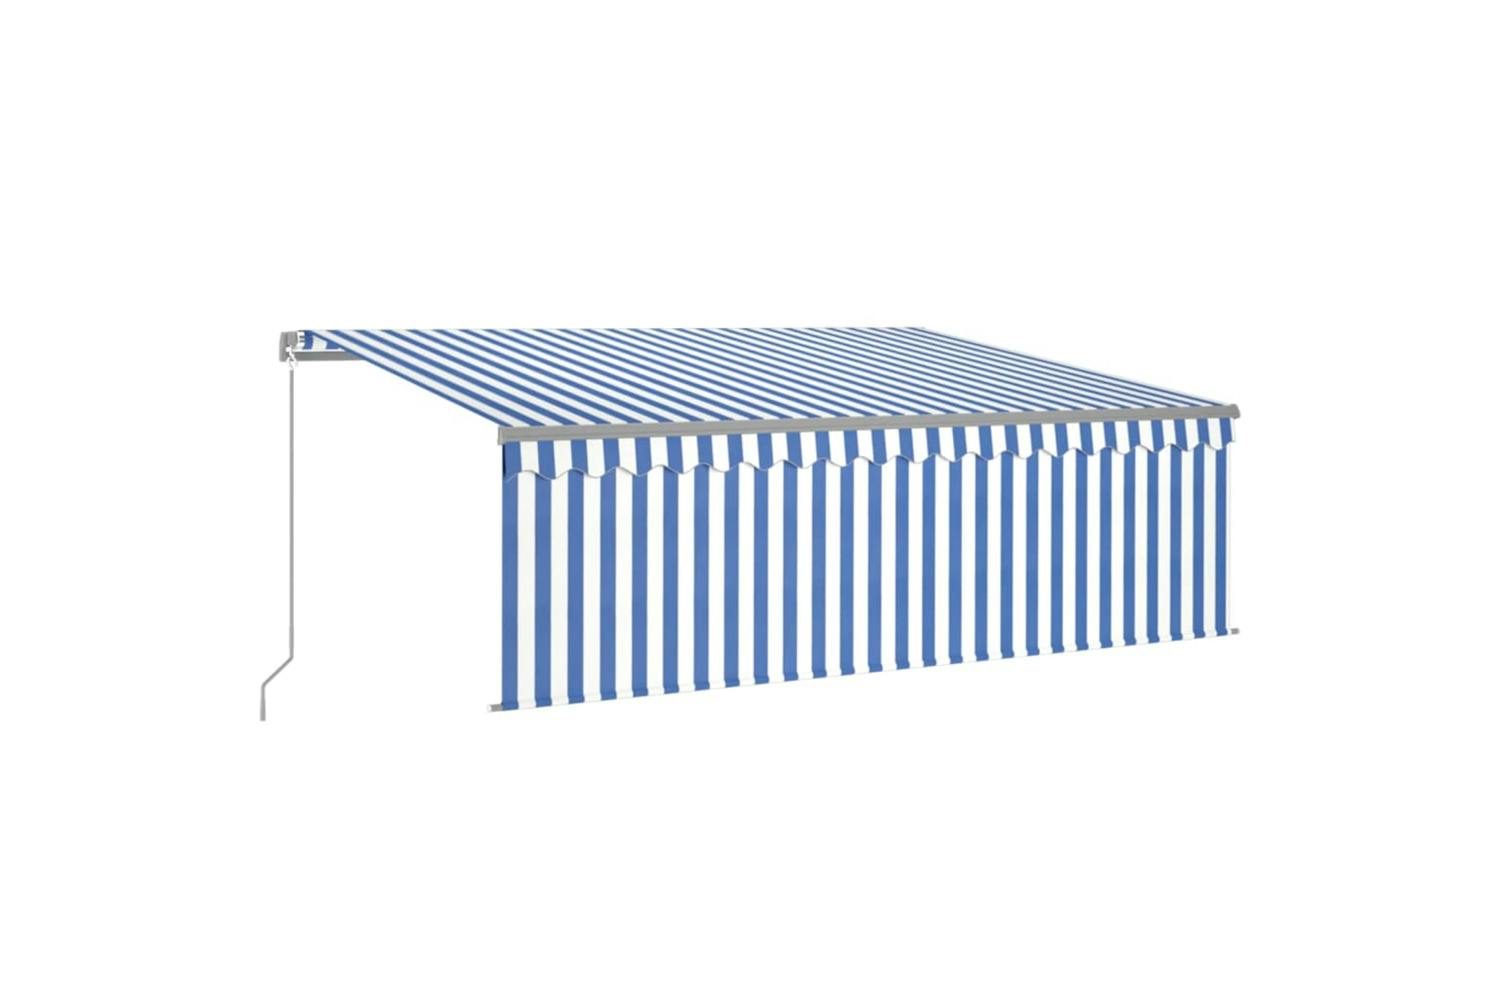 Vidaxl 3069441 Manual Retractable Awning With Blind&led 4.5x3m Blue&white